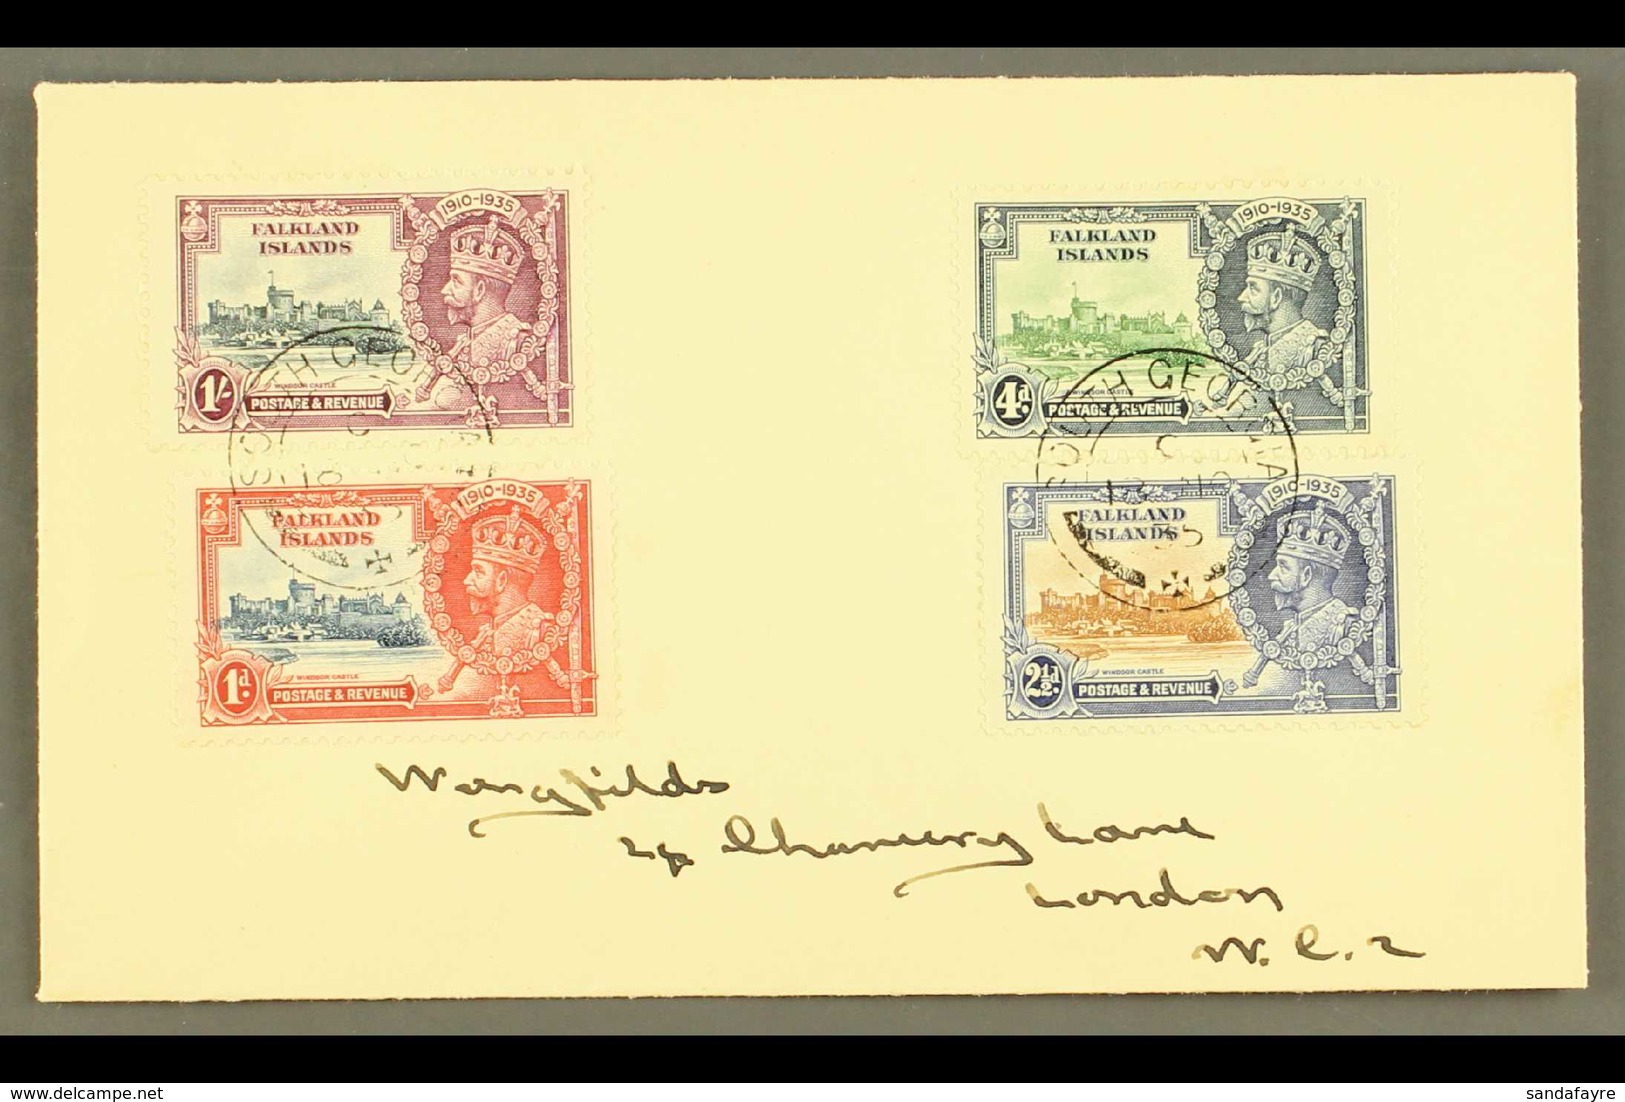 SOUTH GEORGIA 1935 Silver Jubilee Complete Set, SG 139/142, Fine Used On Cover Tied By South Georgia Cds Cancels Of 8 NO - Falkland